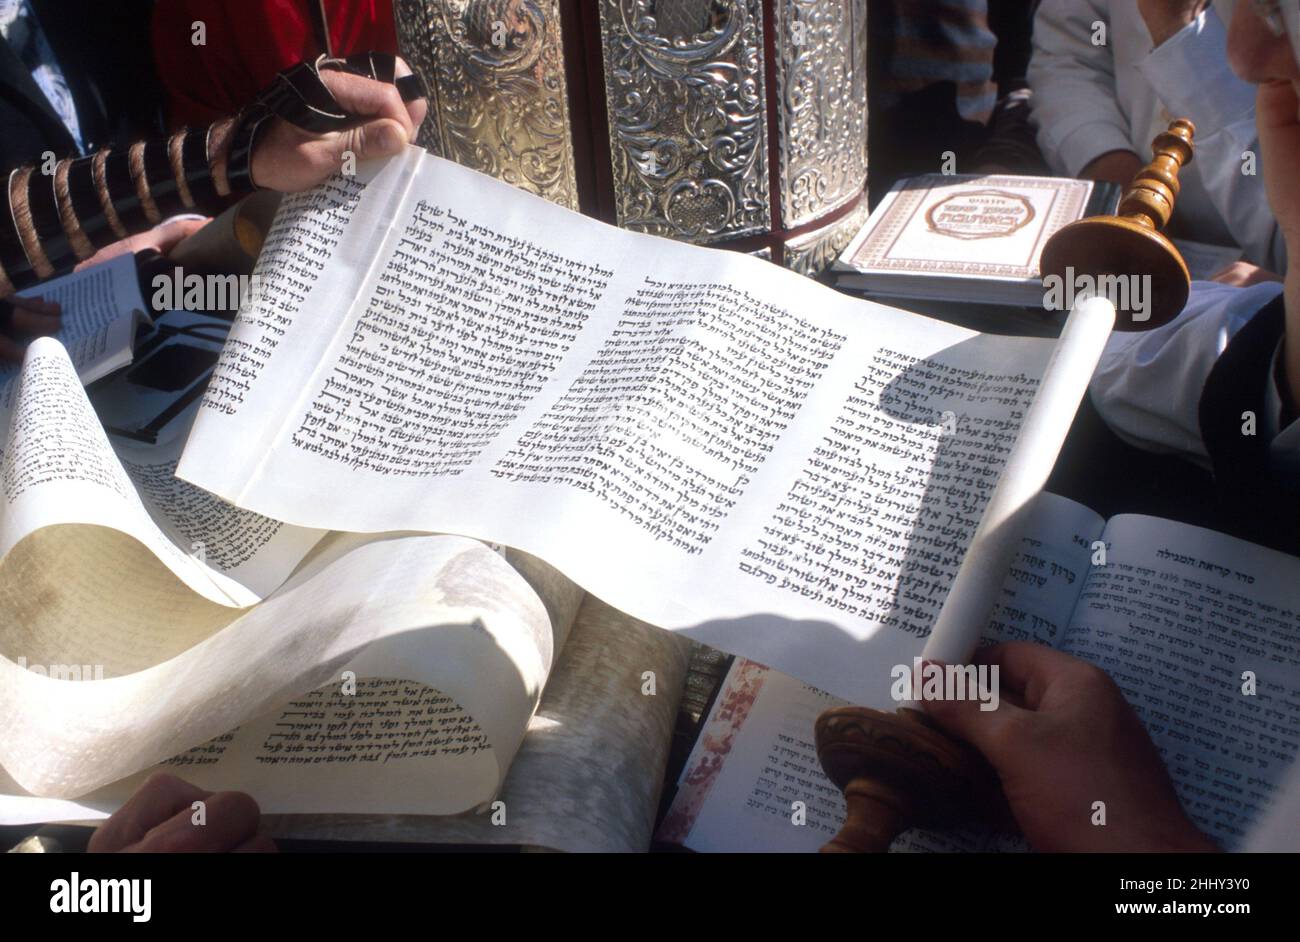 ISRAEL. JERUSALEM.  ULTRA ORTHODOX JEW READ THE MEGILLAH ESTHER BOOK AT THE WESTERN WALL DURING PURIM FESTIVAL Stock Photo